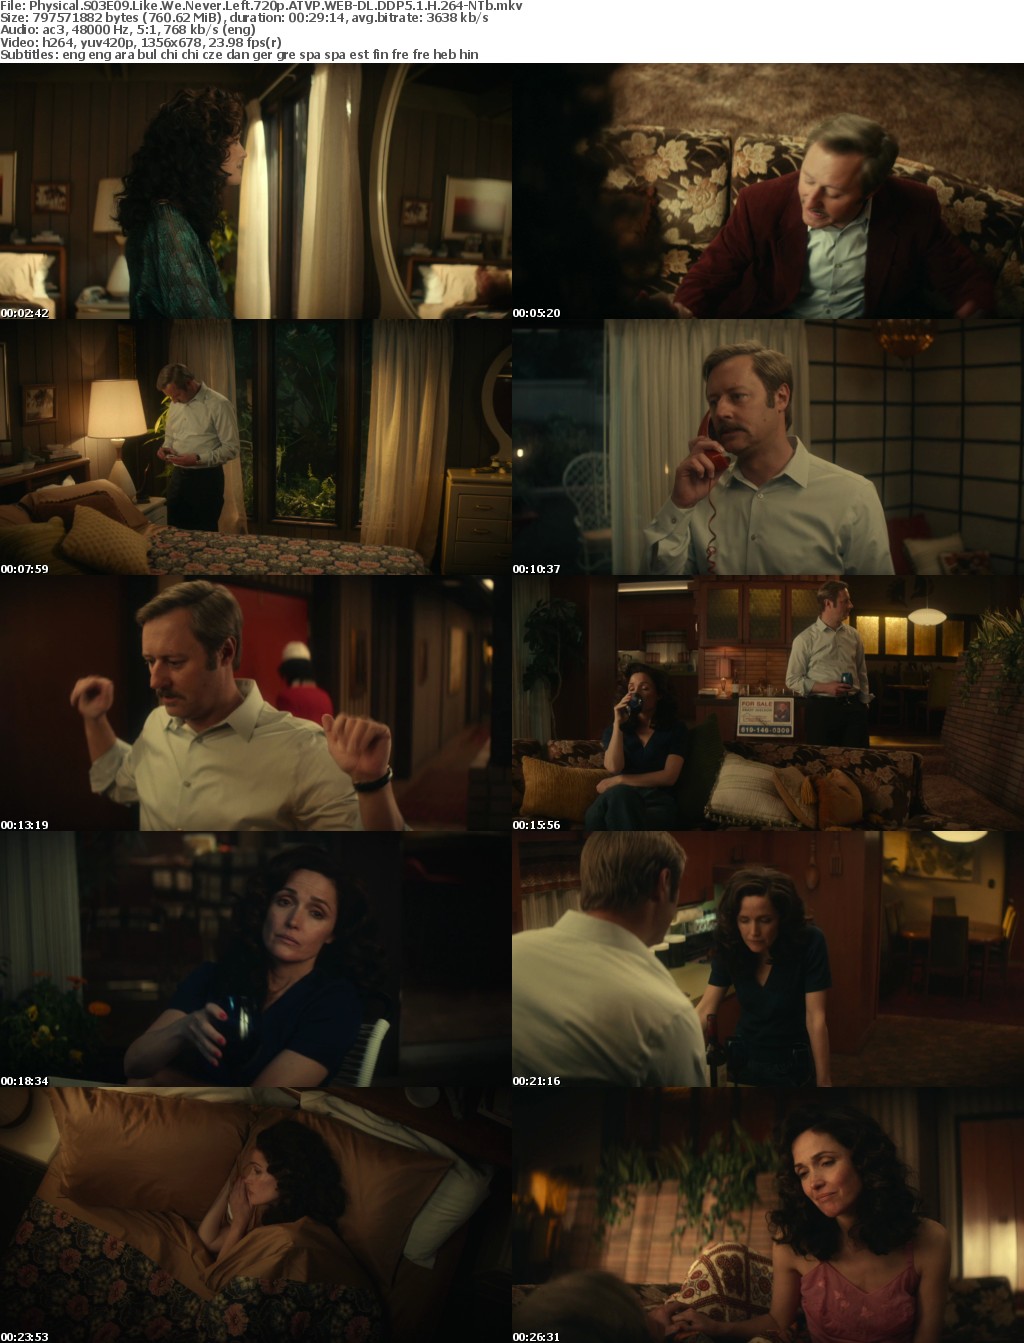 Physical S03E09 Like We Never Left 720p ATVP WEB-DL DDP5 1 H 264-NTb